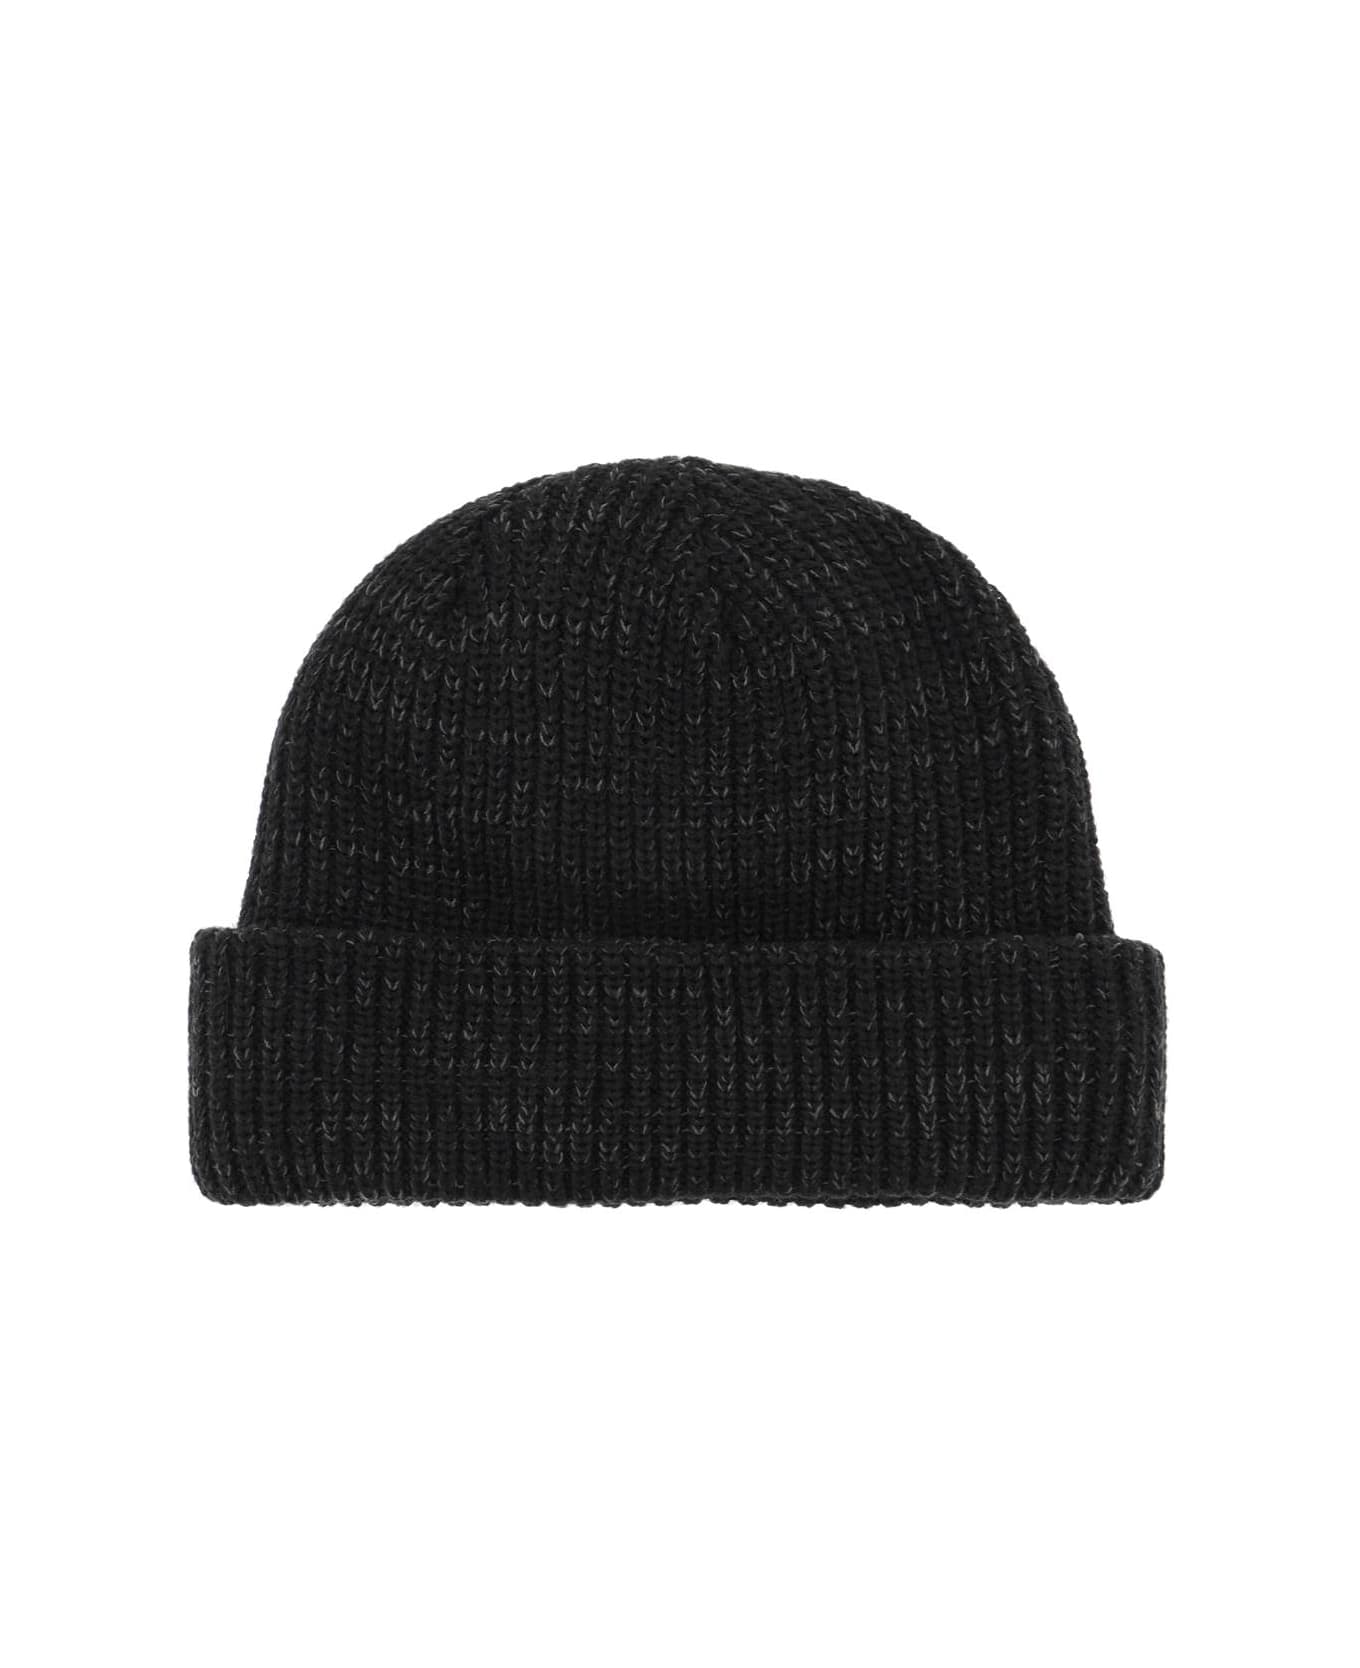 The North Face Salty Dog Beanie Hat - TNF BLACK (Black)